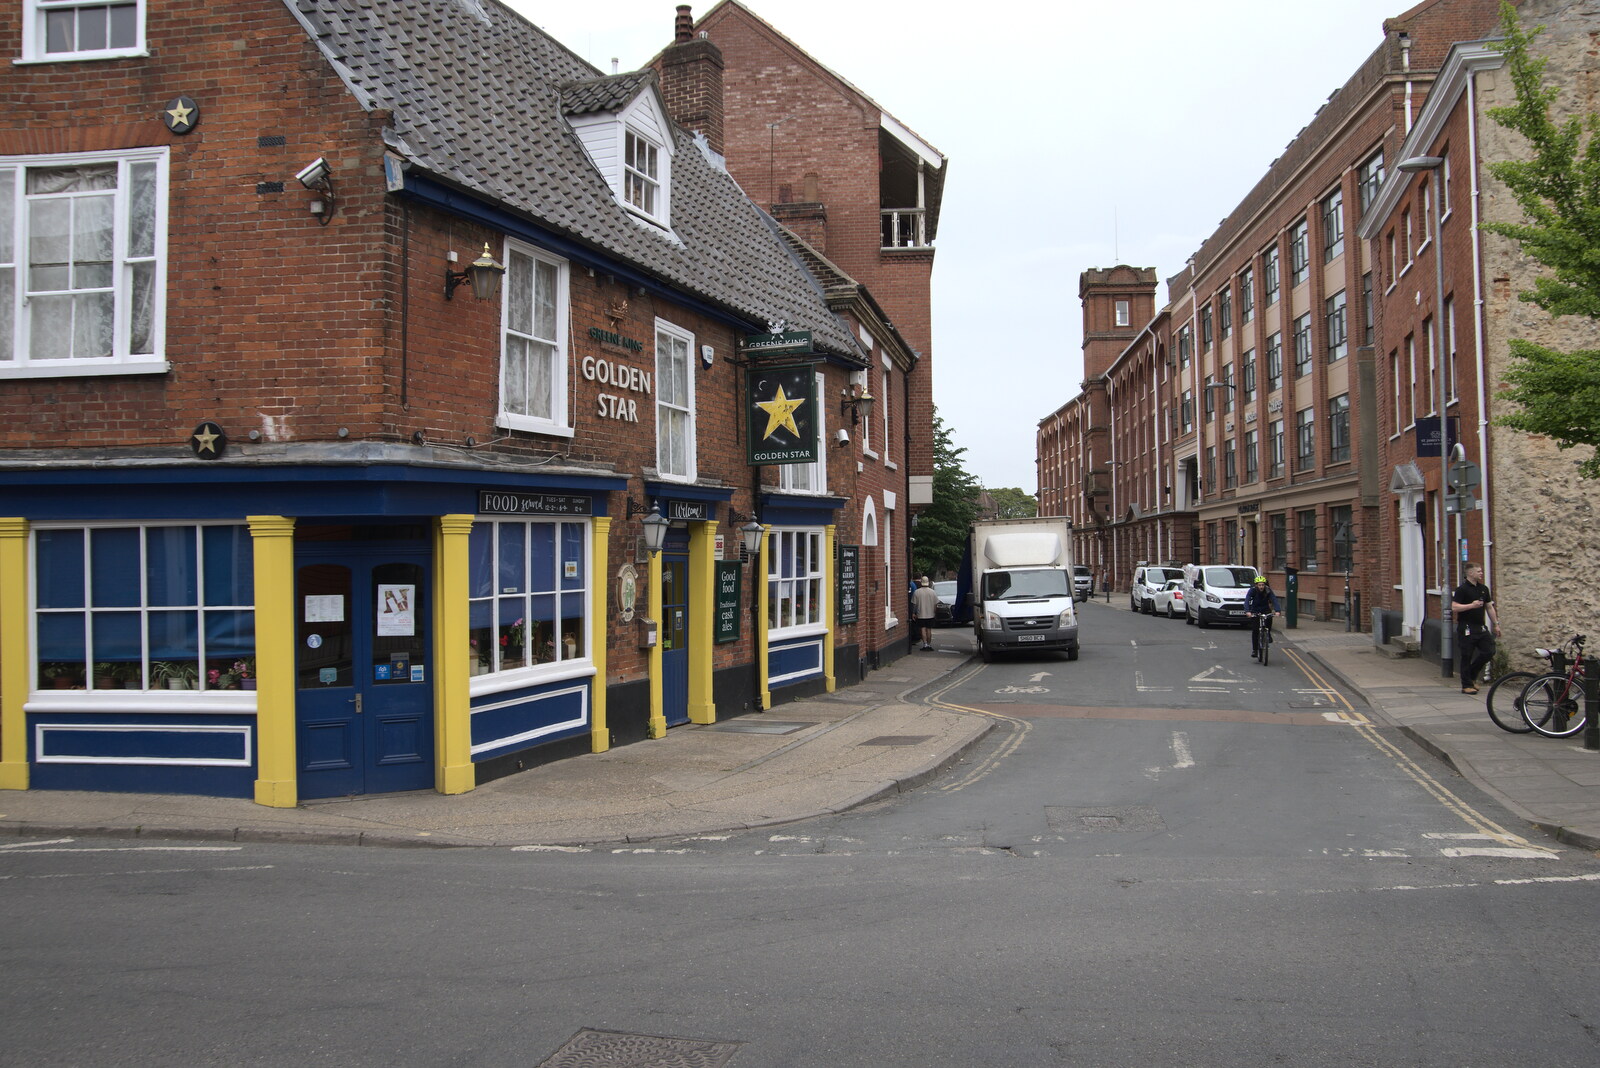 The Golden Star on Duke Street/Colegate from Discovering the Hidden City: Norwich, Norfolk - 23rd May 2022